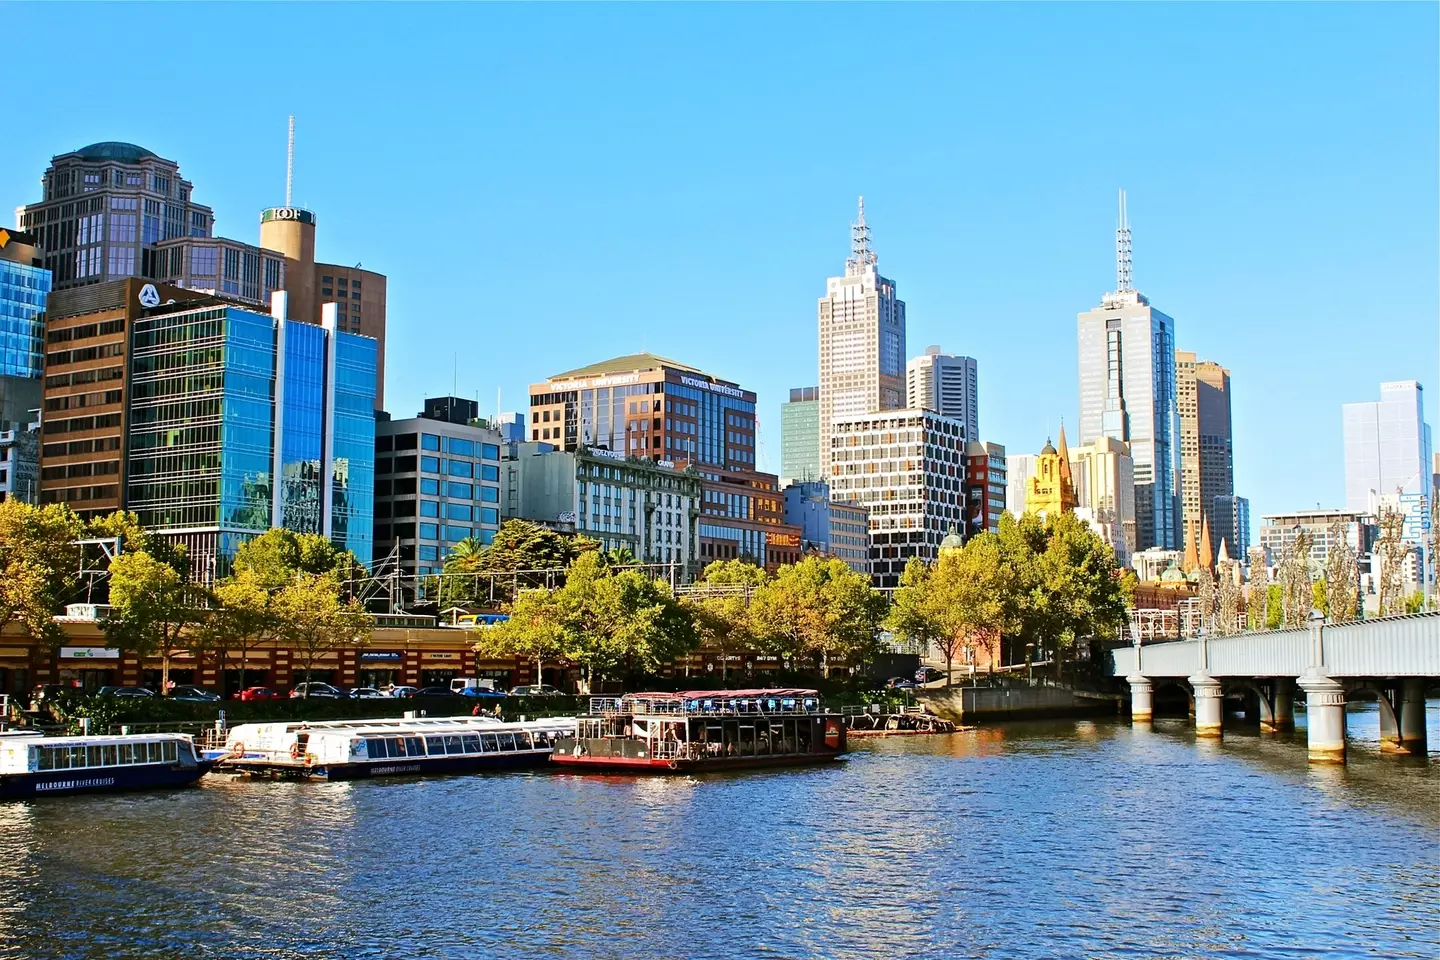 Melbourne has now become the biggest city in Australia.